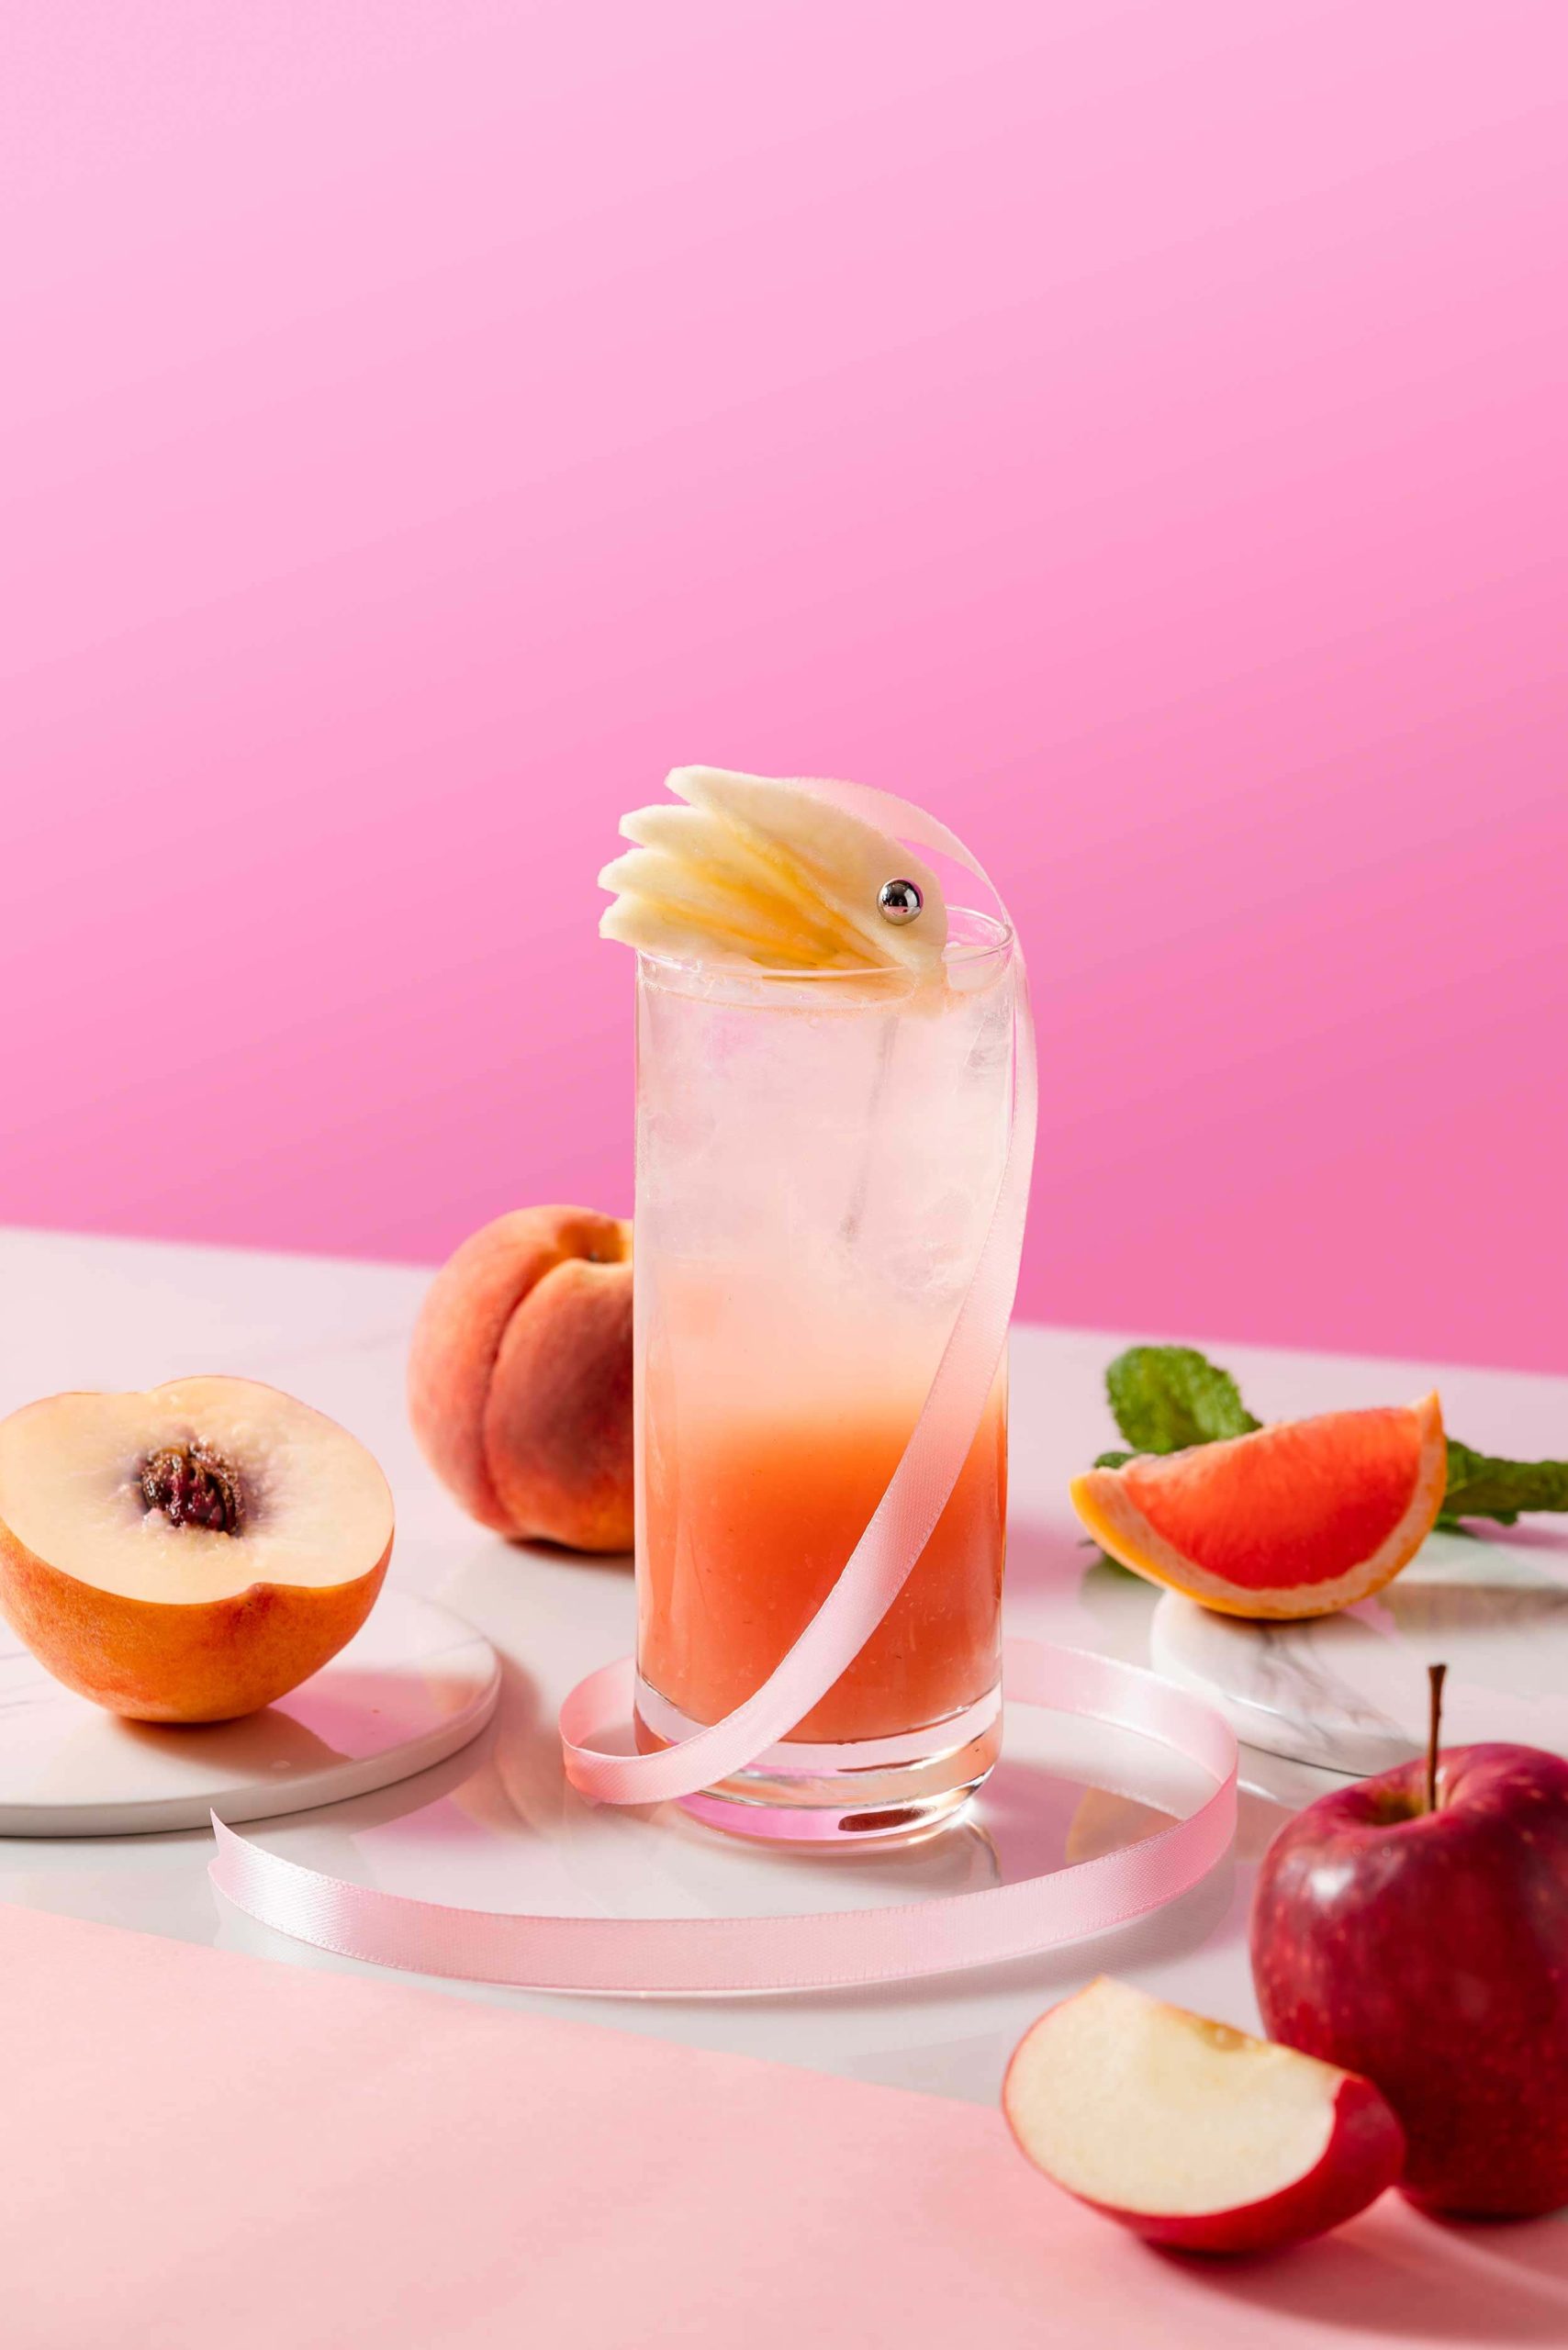 The Pink Highball mocktail is a cold brewed oolong tea infused with apple juice and peach puree. Finished with a splash of grapefruit juice, the fruity and refreshing concoction is both sweet and tangy.